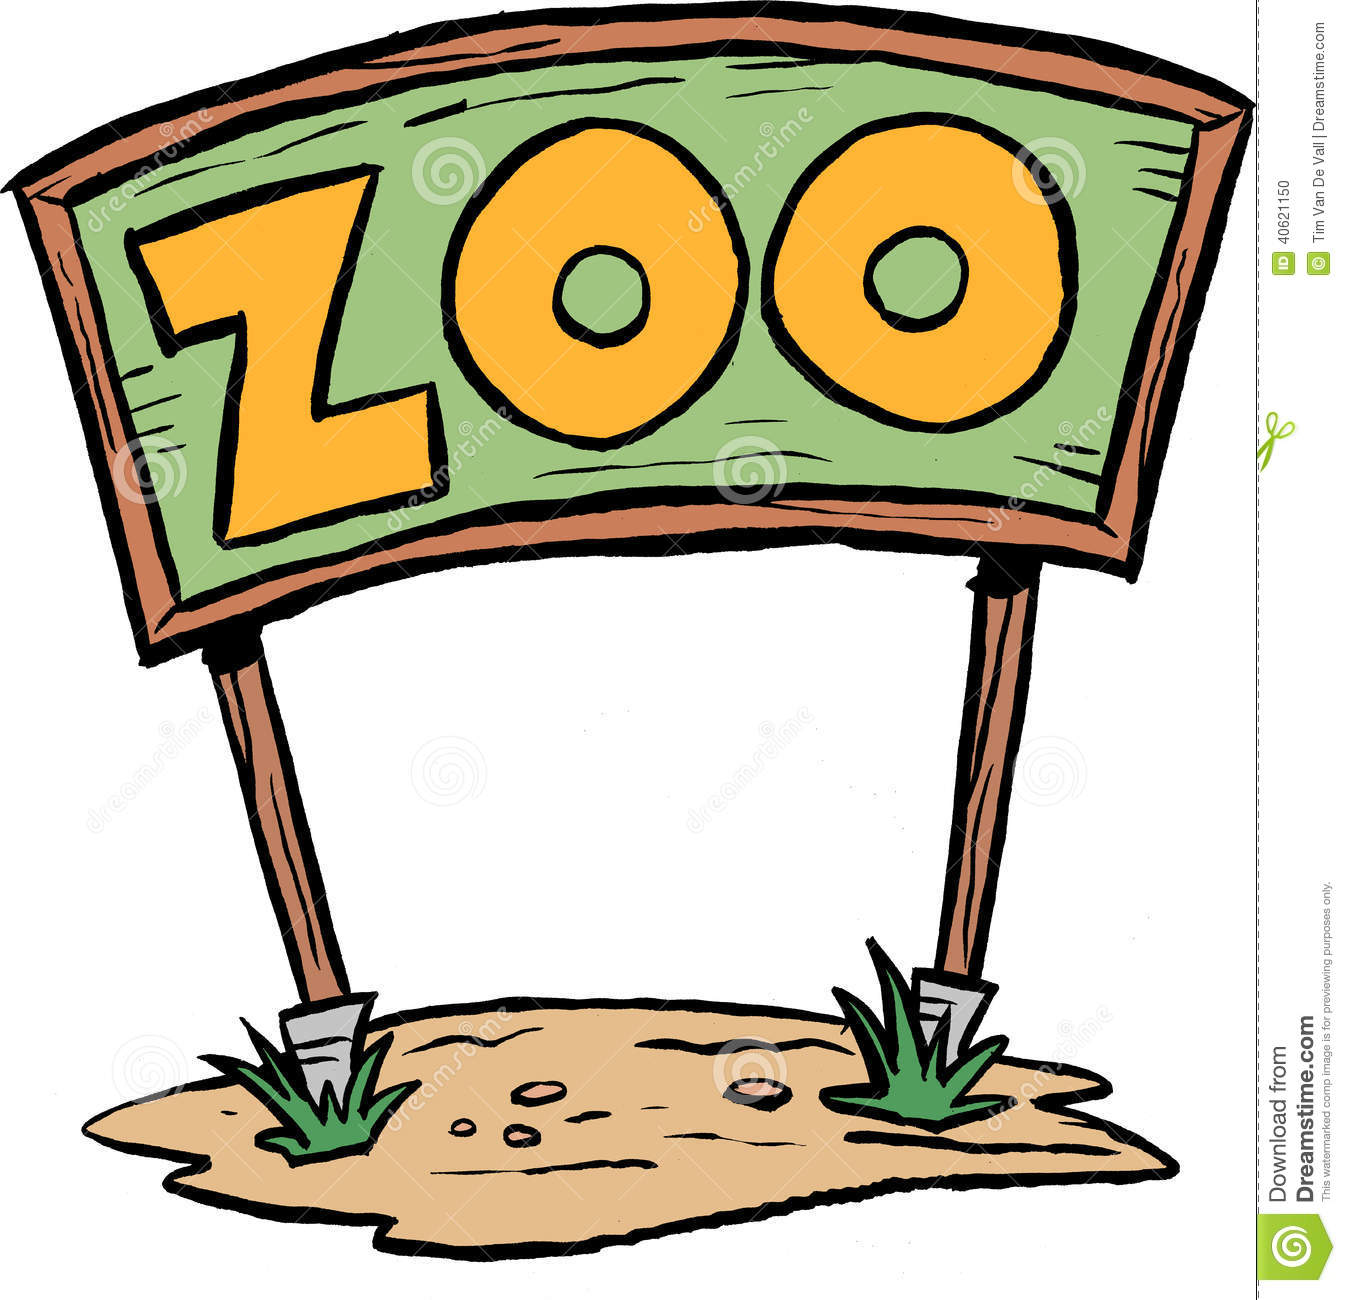 71 clipart zoo.